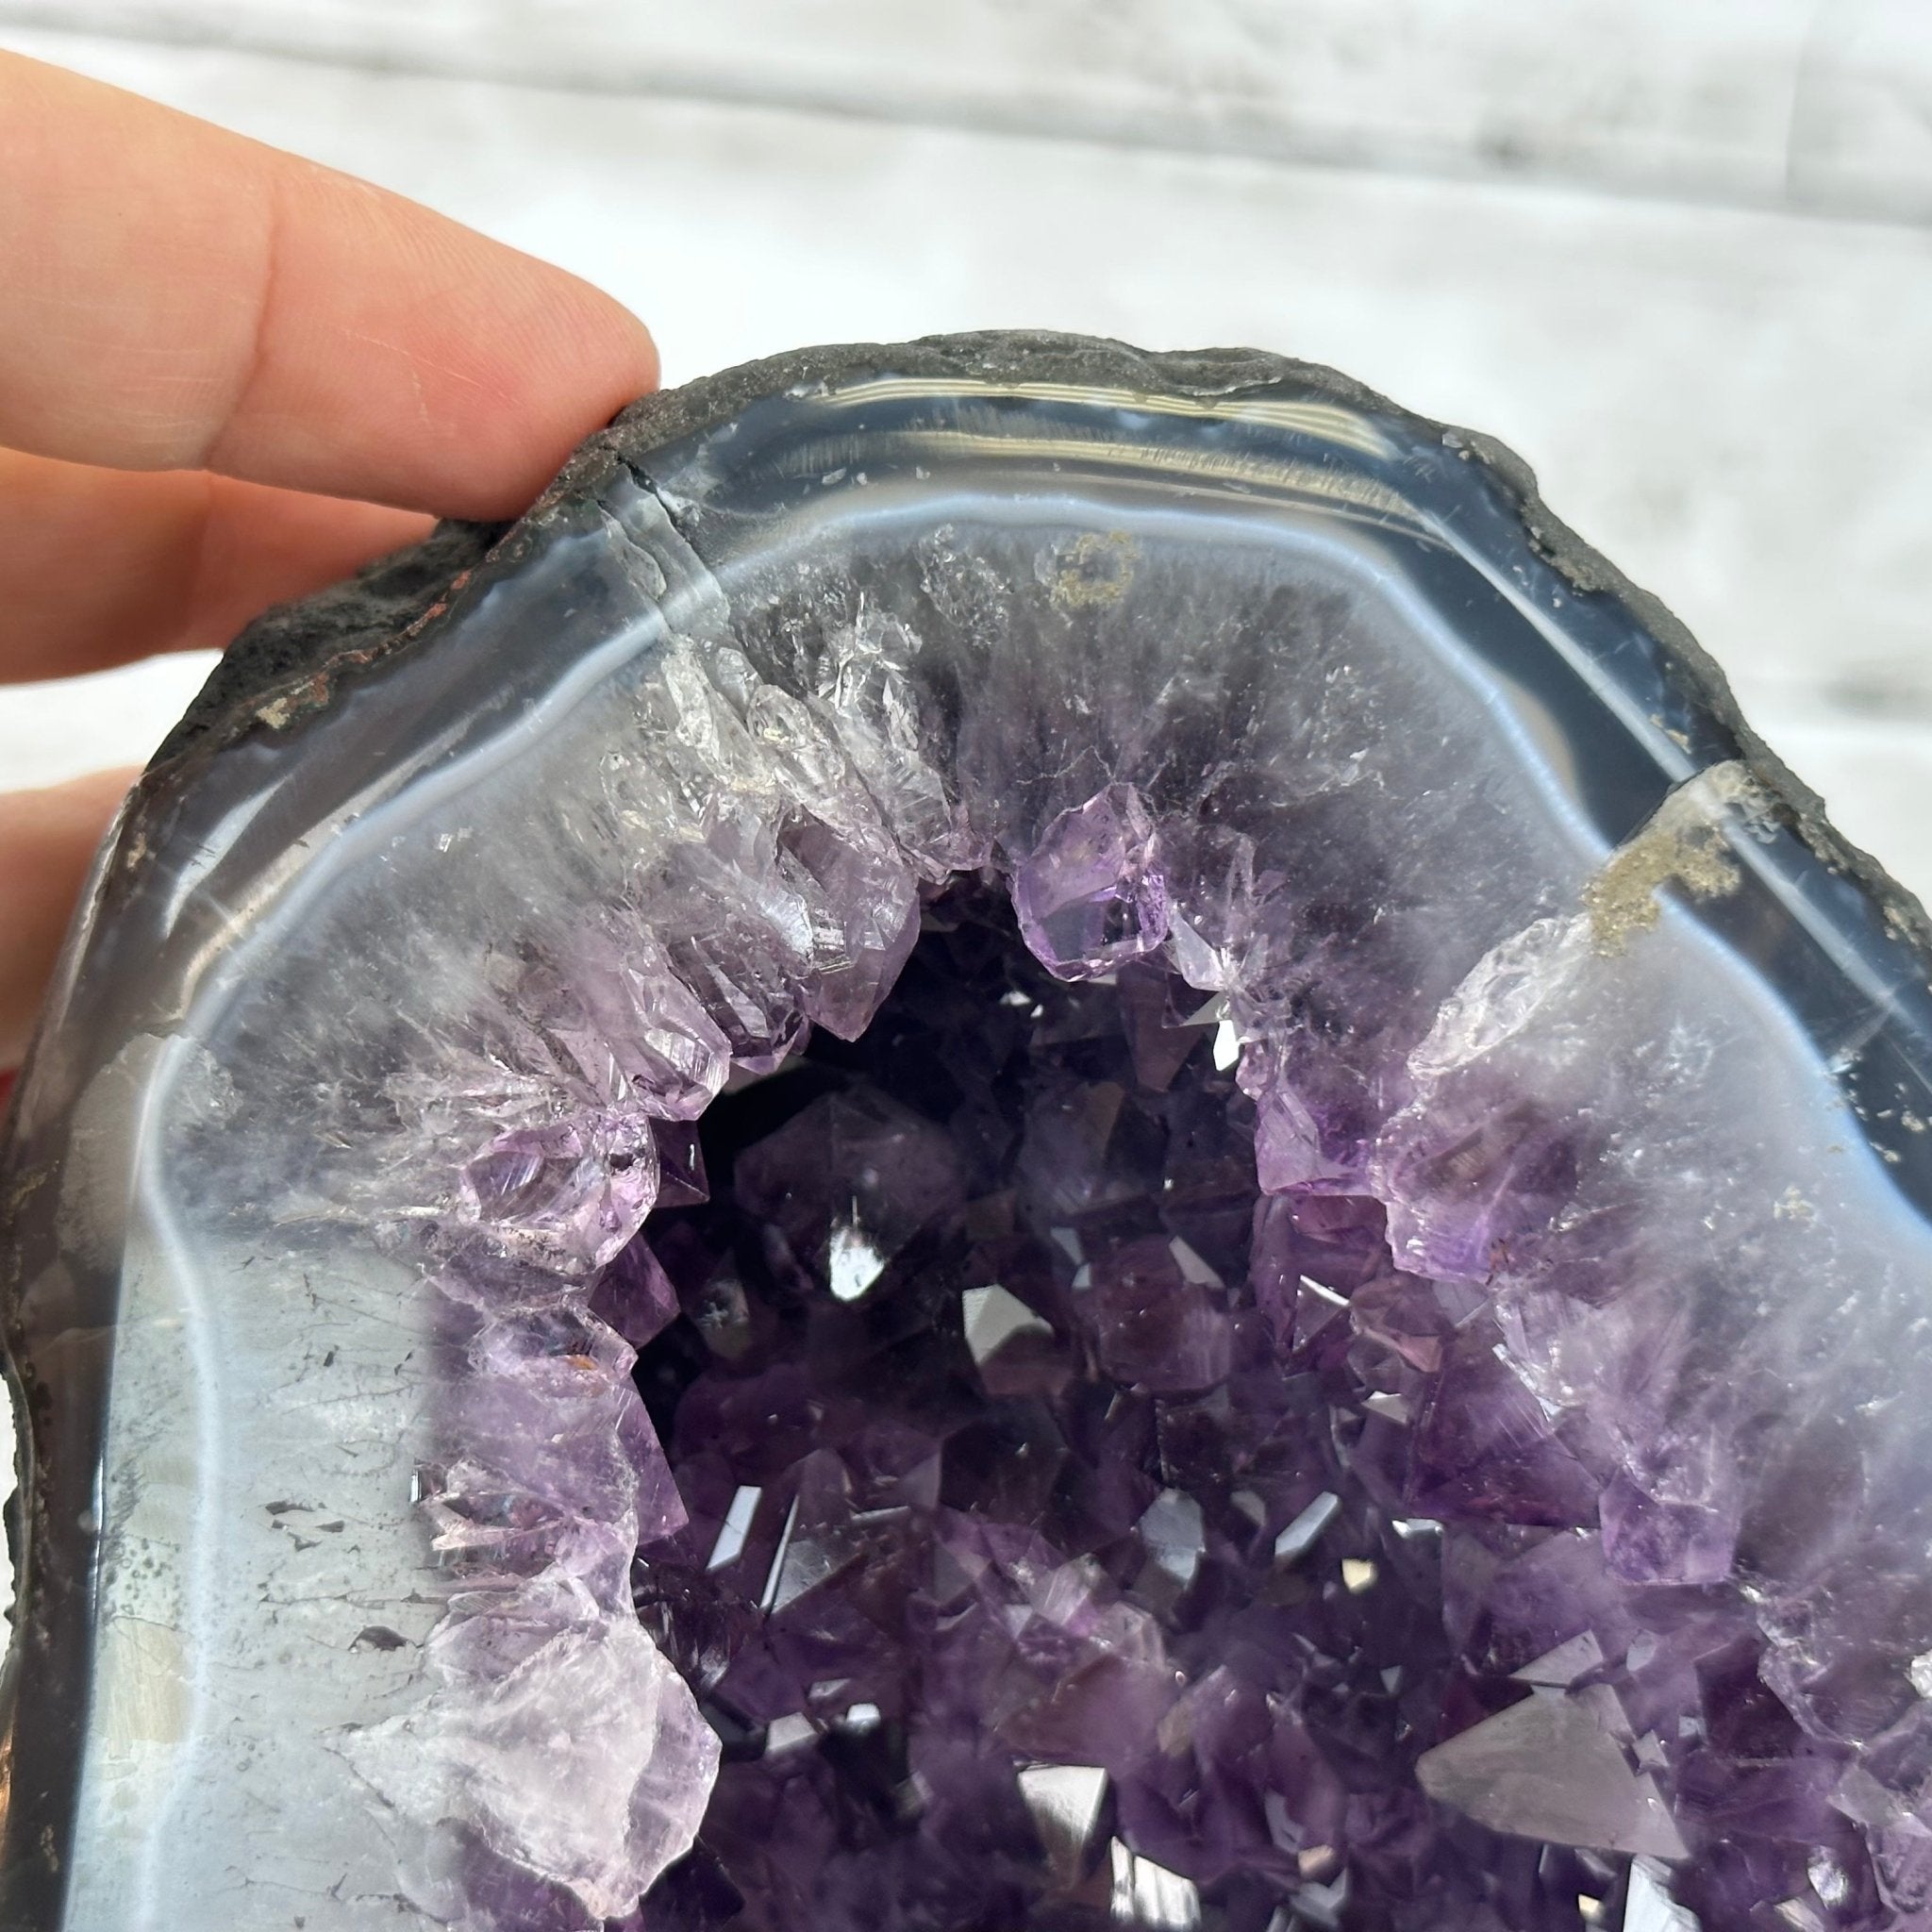 Super Quality Brazilian Amethyst Cathedral, 58.9 lbs & 21" Tall, Model #5601-1293 by Brazil Gems - Brazil GemsBrazil GemsSuper Quality Brazilian Amethyst Cathedral, 58.9 lbs & 21" Tall, Model #5601-1293 by Brazil GemsCathedrals5601-1293